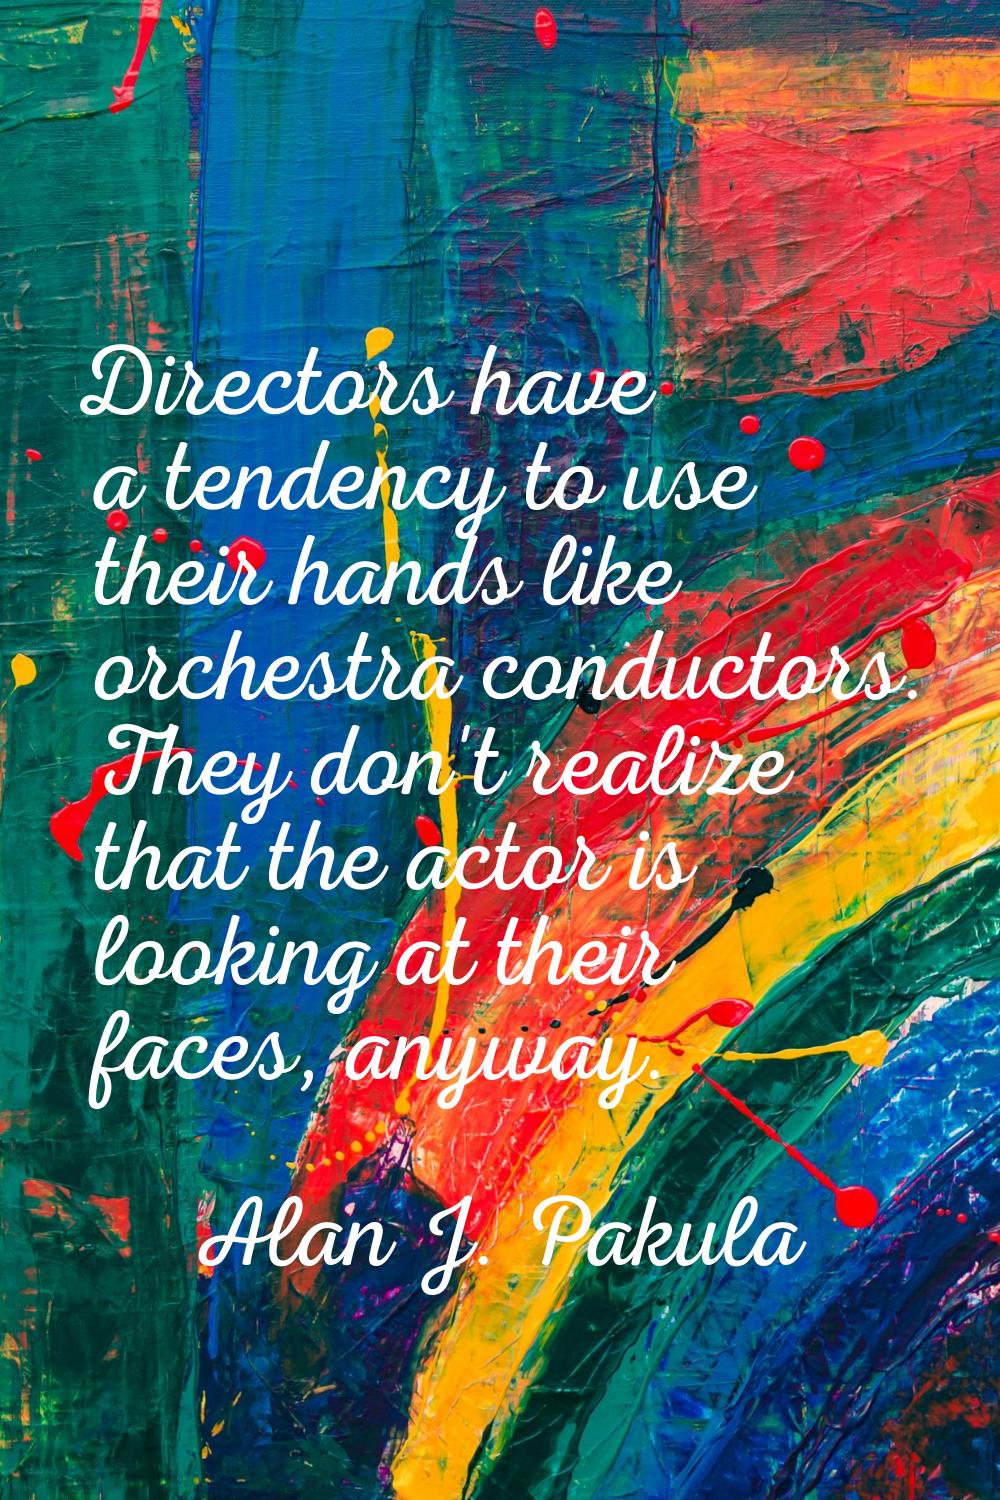 Directors have a tendency to use their hands like orchestra conductors. They don't realize that the